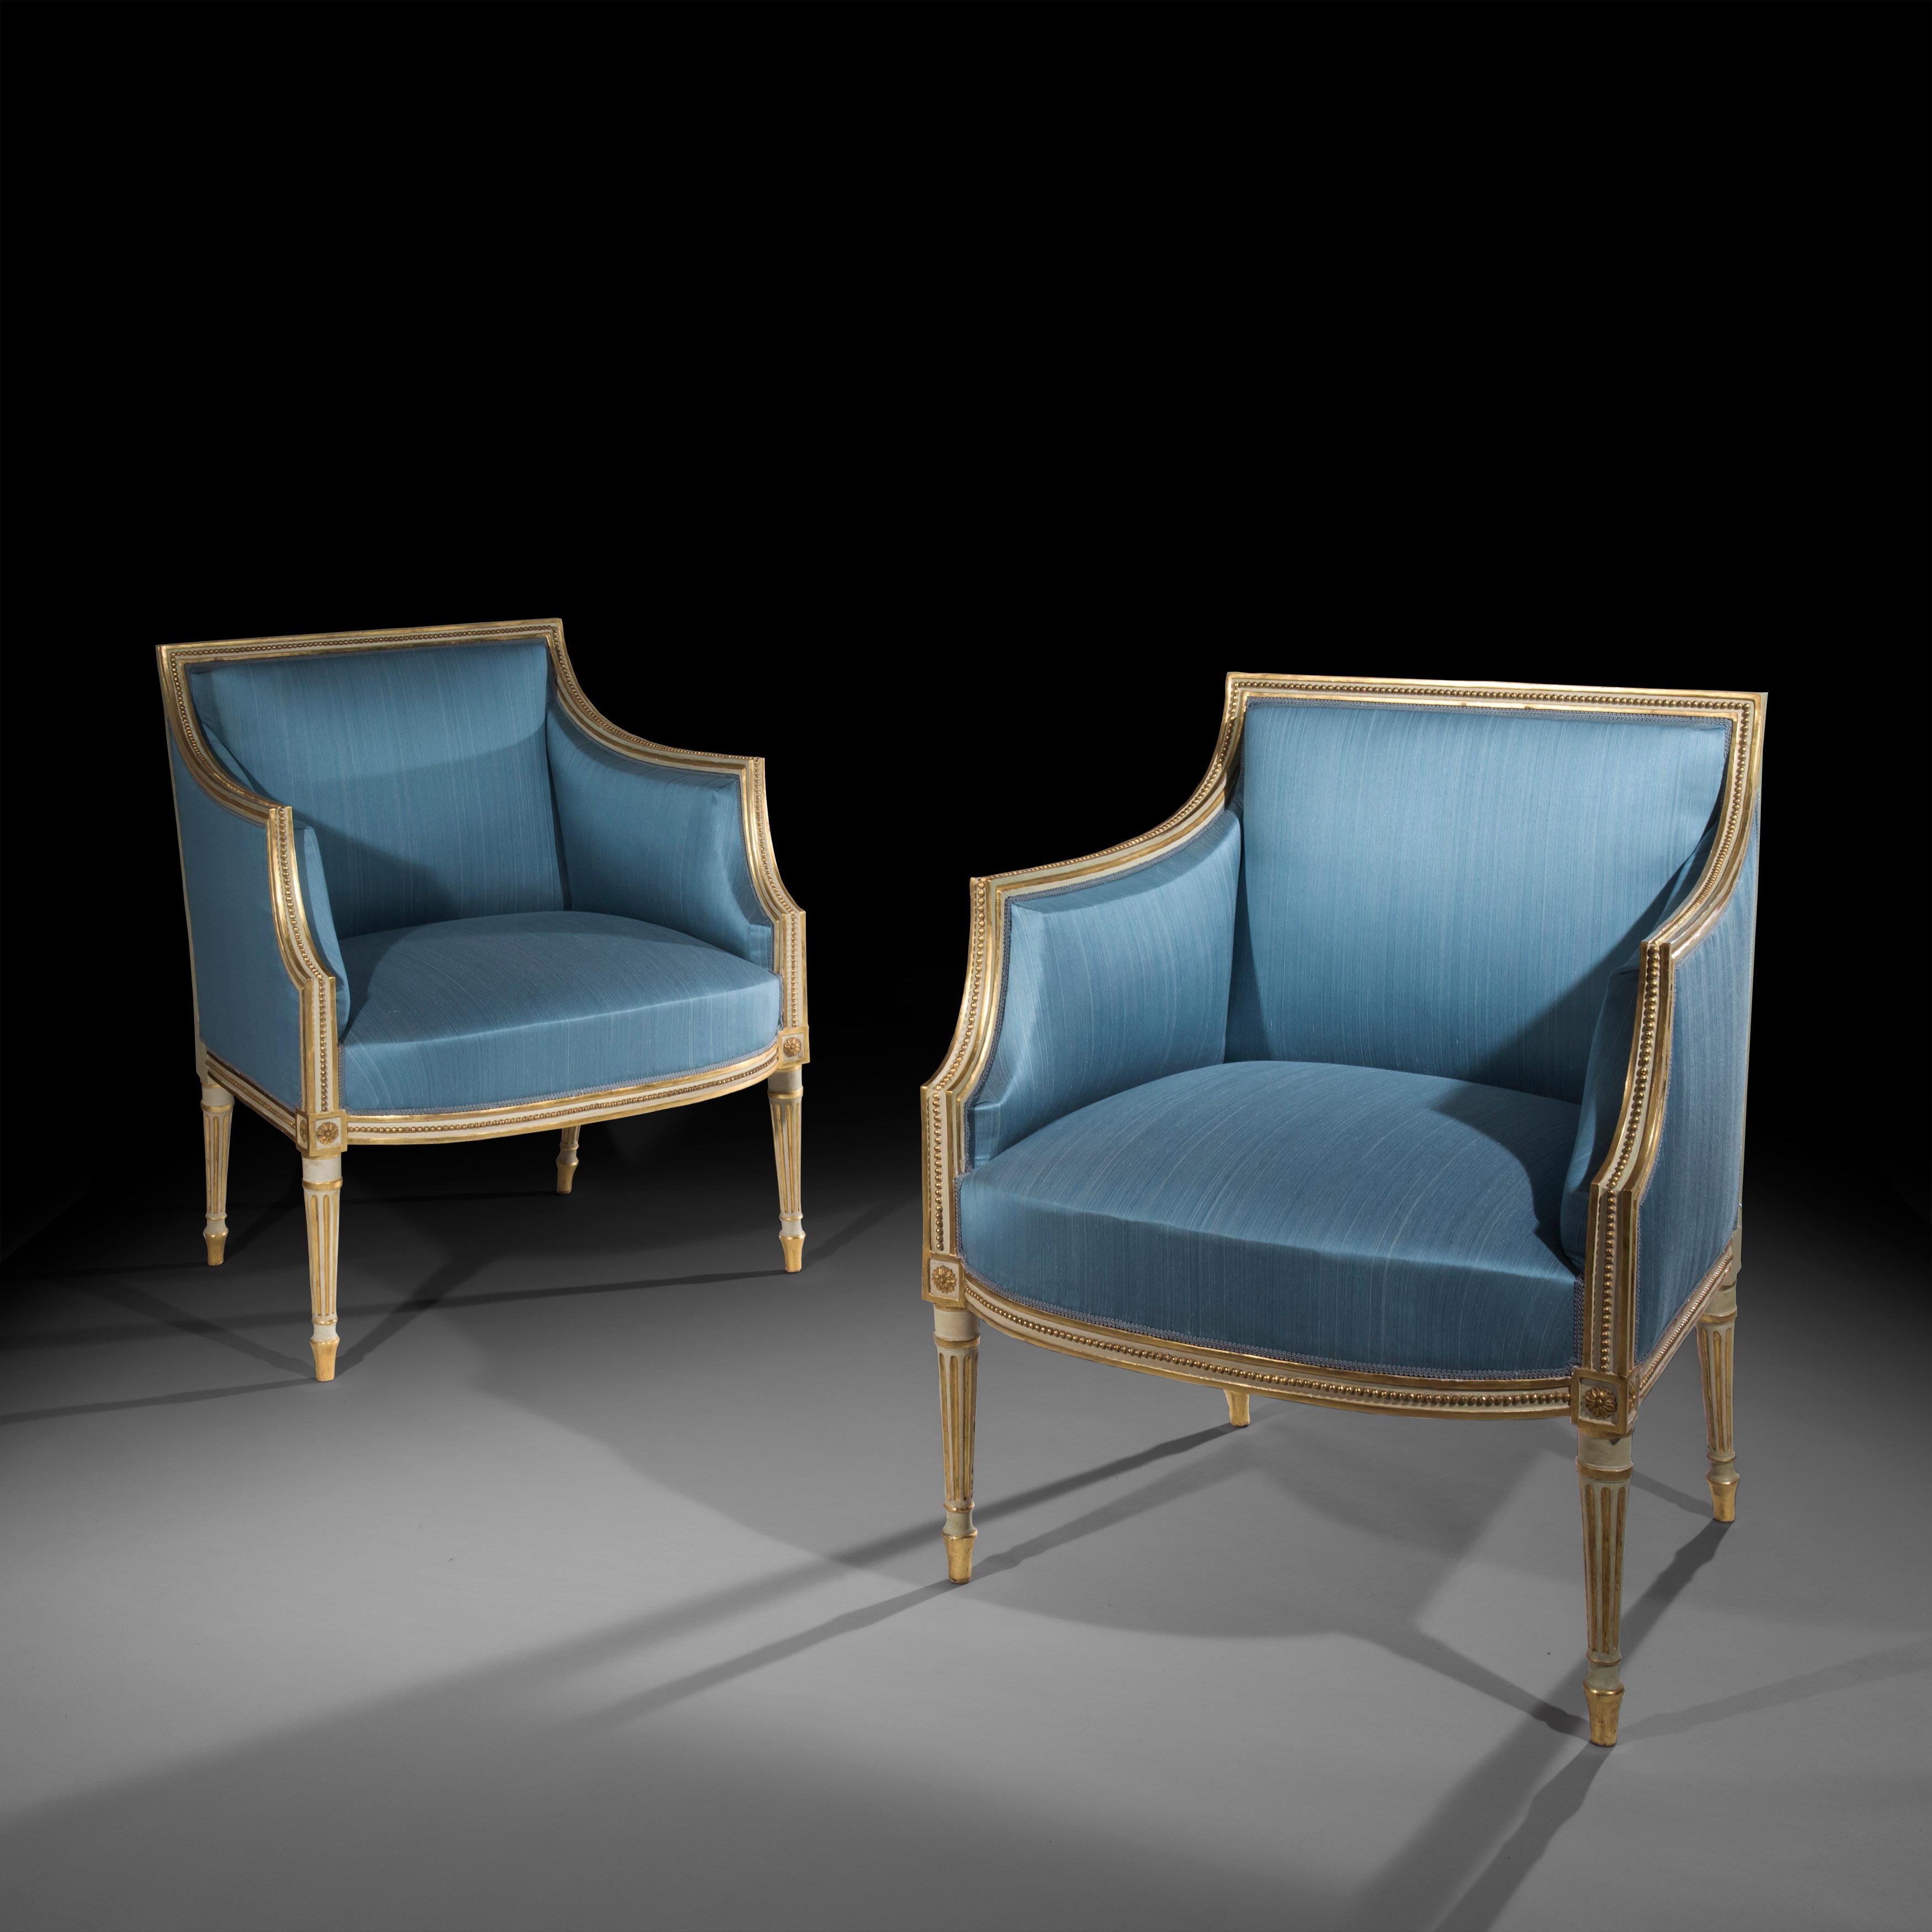 Georgian 18th Century Painted and Gilded Armchairs